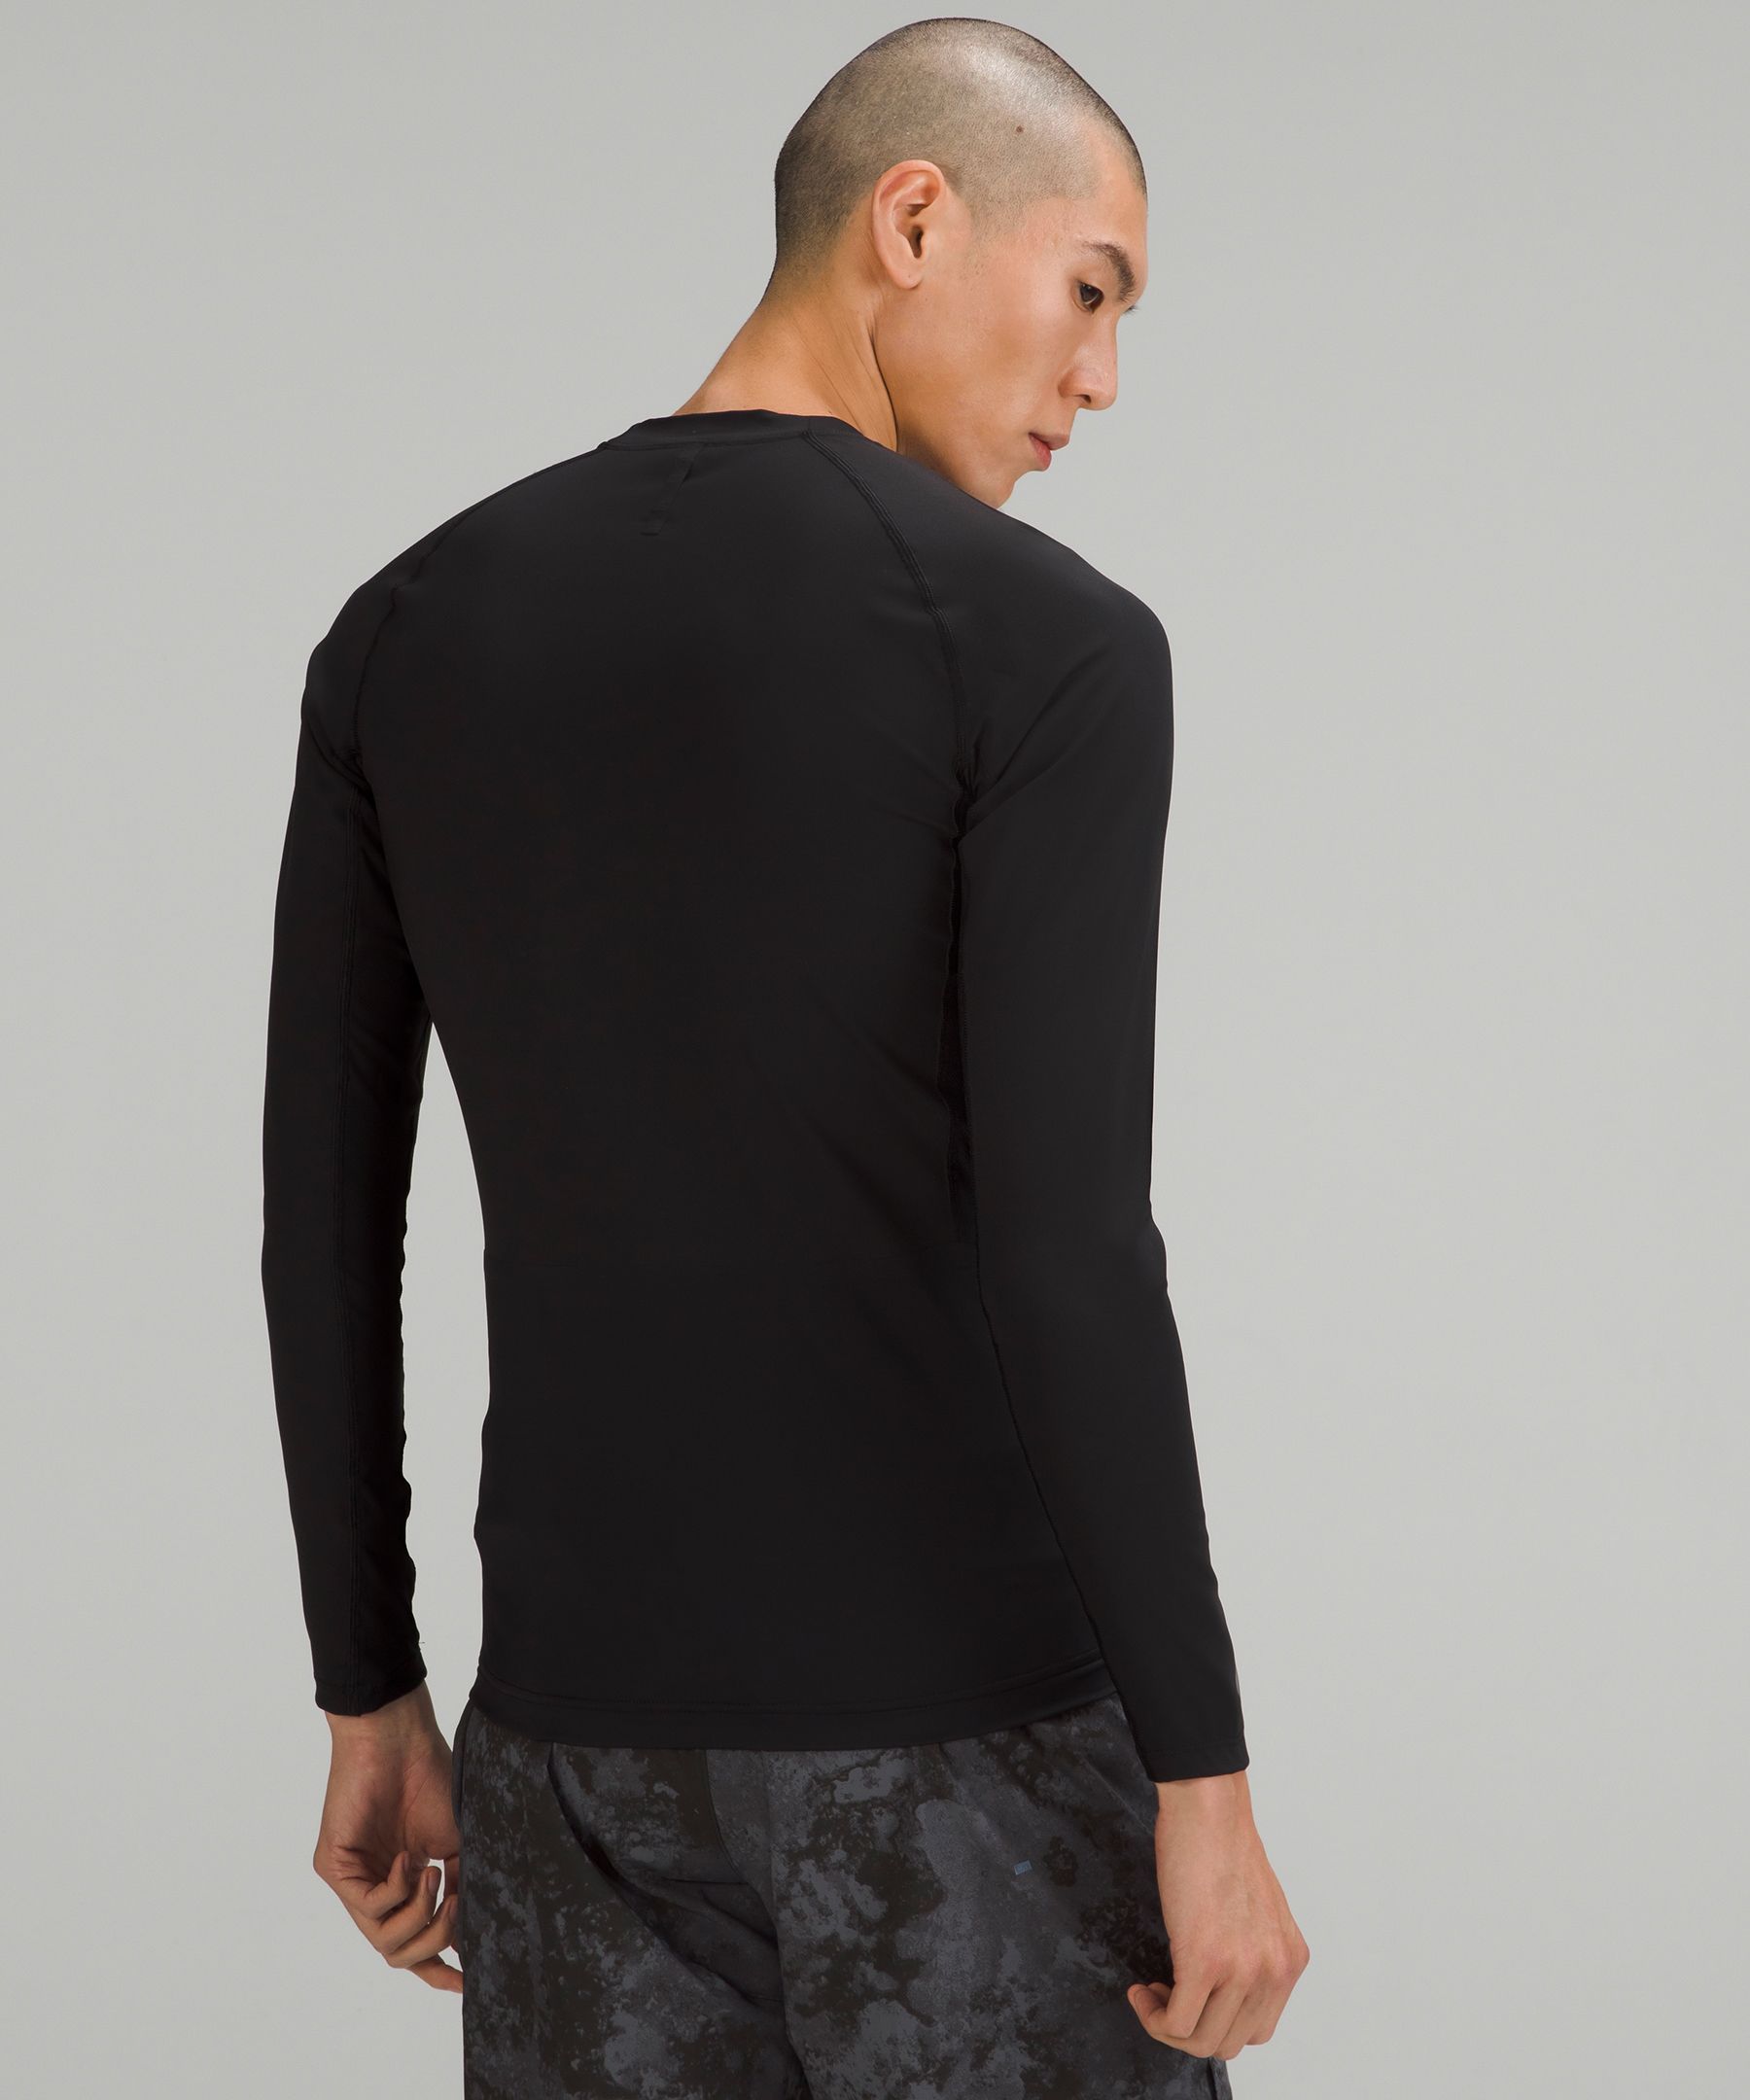 License to Train Fitted Long-Sleeve Shirt | lululemon SG